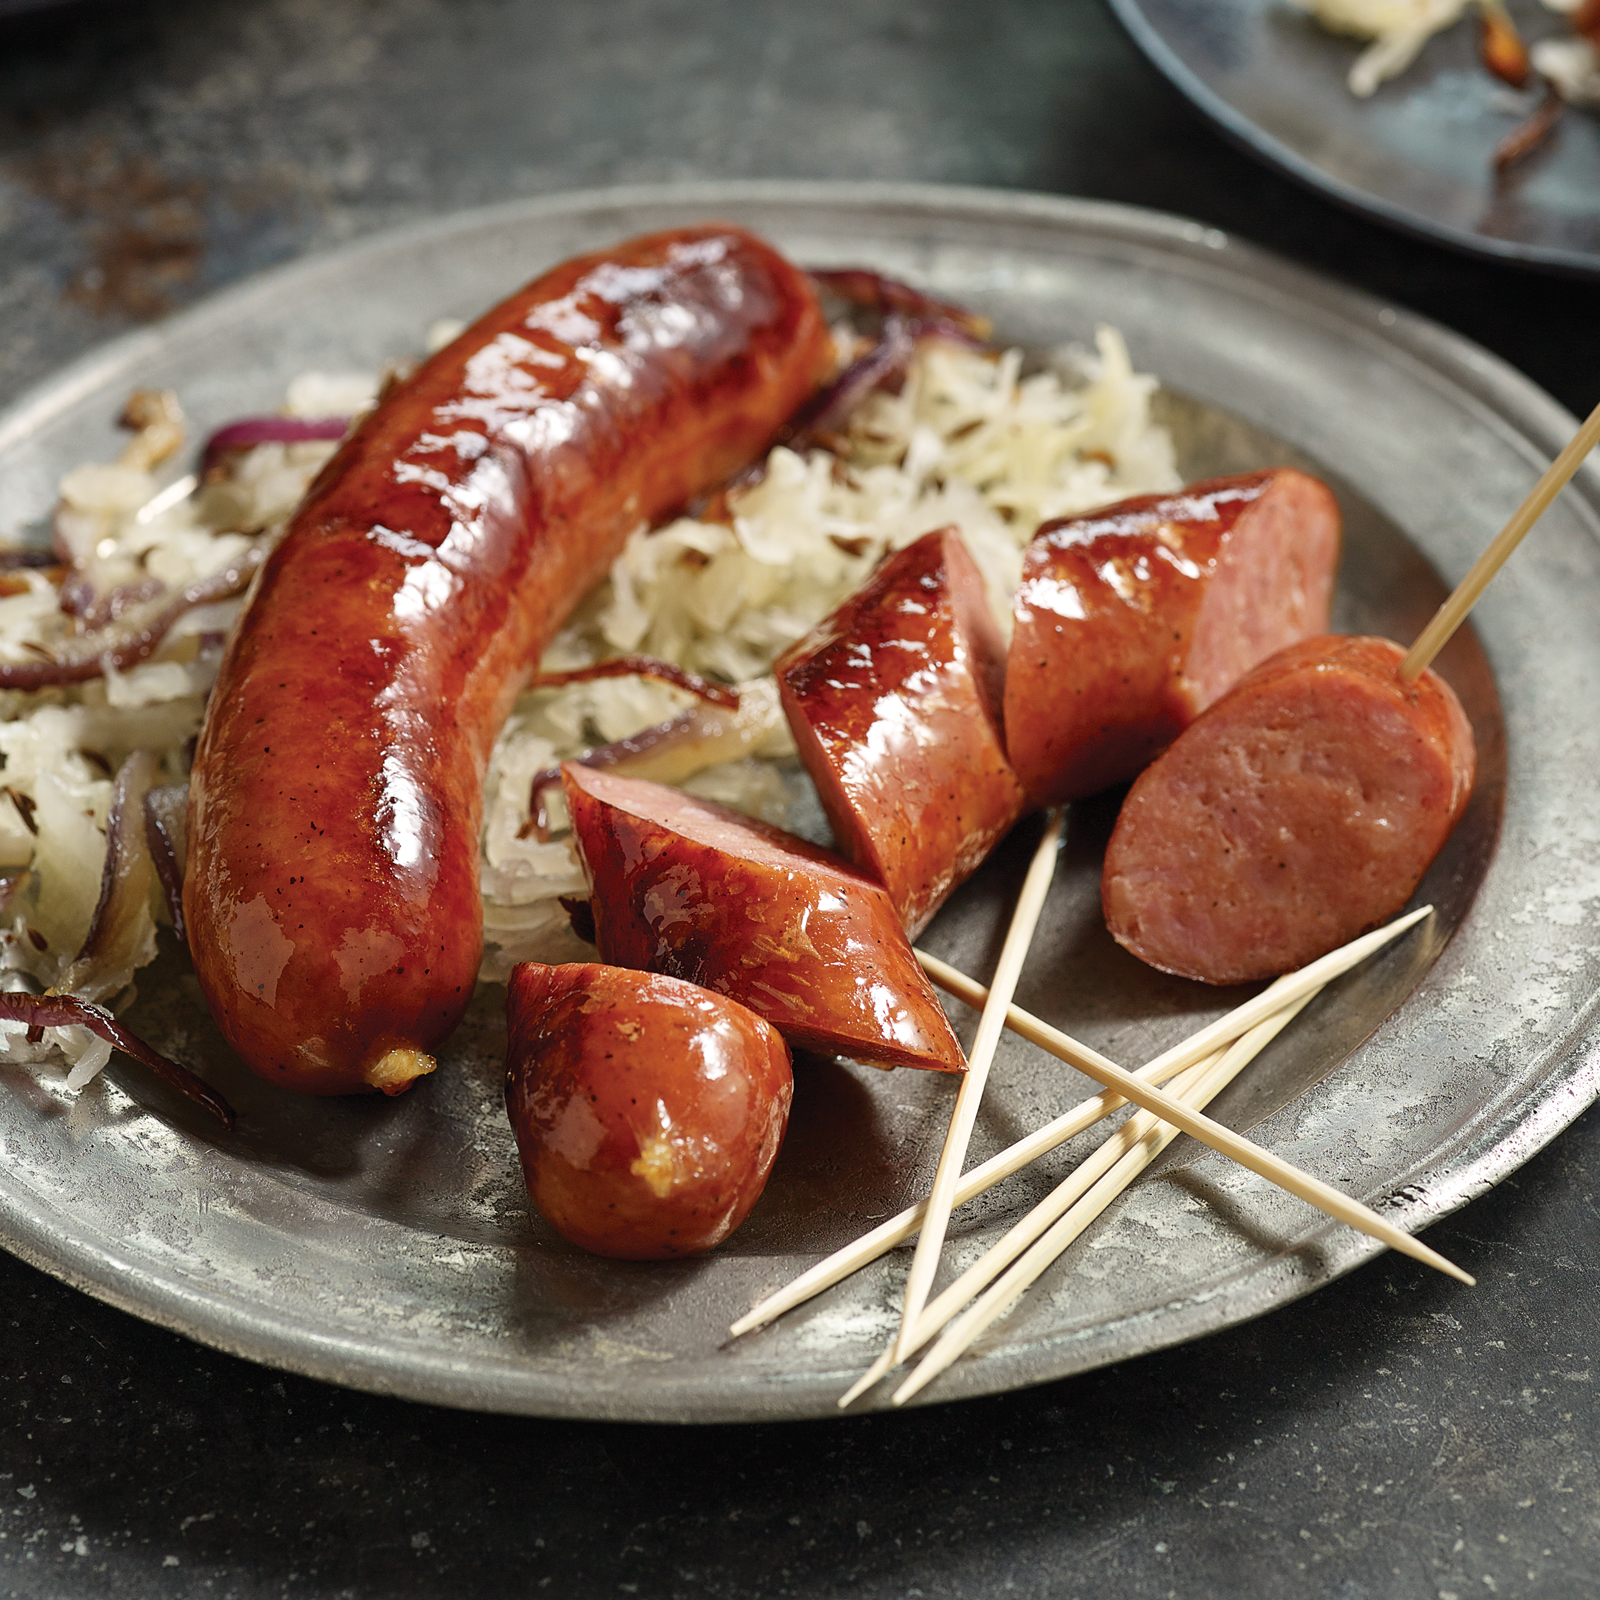 Made the old-fashioned way with premium ground pork and beef, Omaha Steaks Kielbasa Sausages are great at a barbeque or in your favorite recipe.